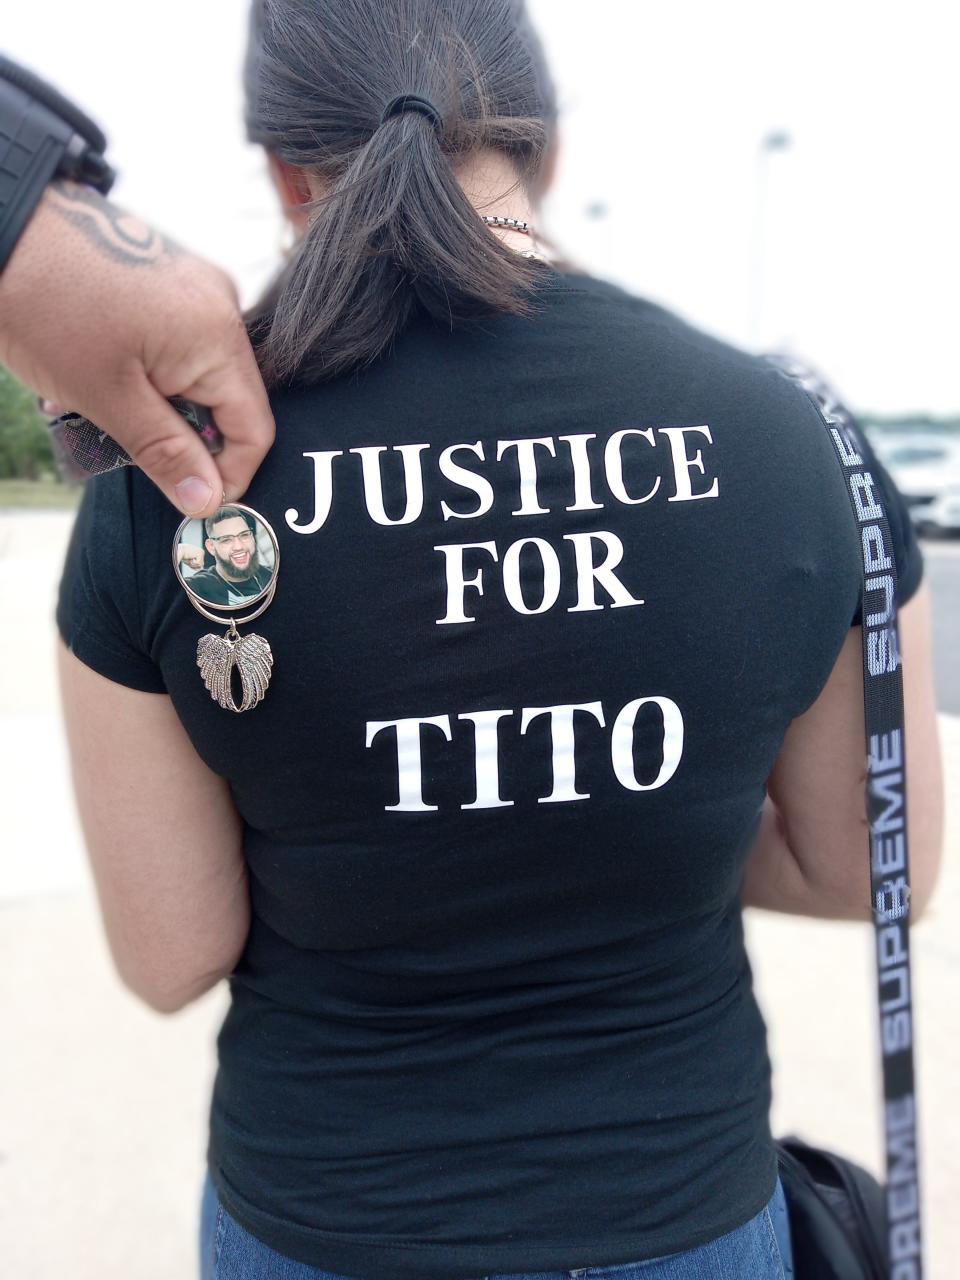 Chaisek Flores, a sister of shooting victim Robert Aponte-Flores, wears a T-shirt in honor of her brother, who went by the nickname "Tito." Family members also wore pendants with his picture to the Aug. 7 arraignment of the man accused of shooting him.